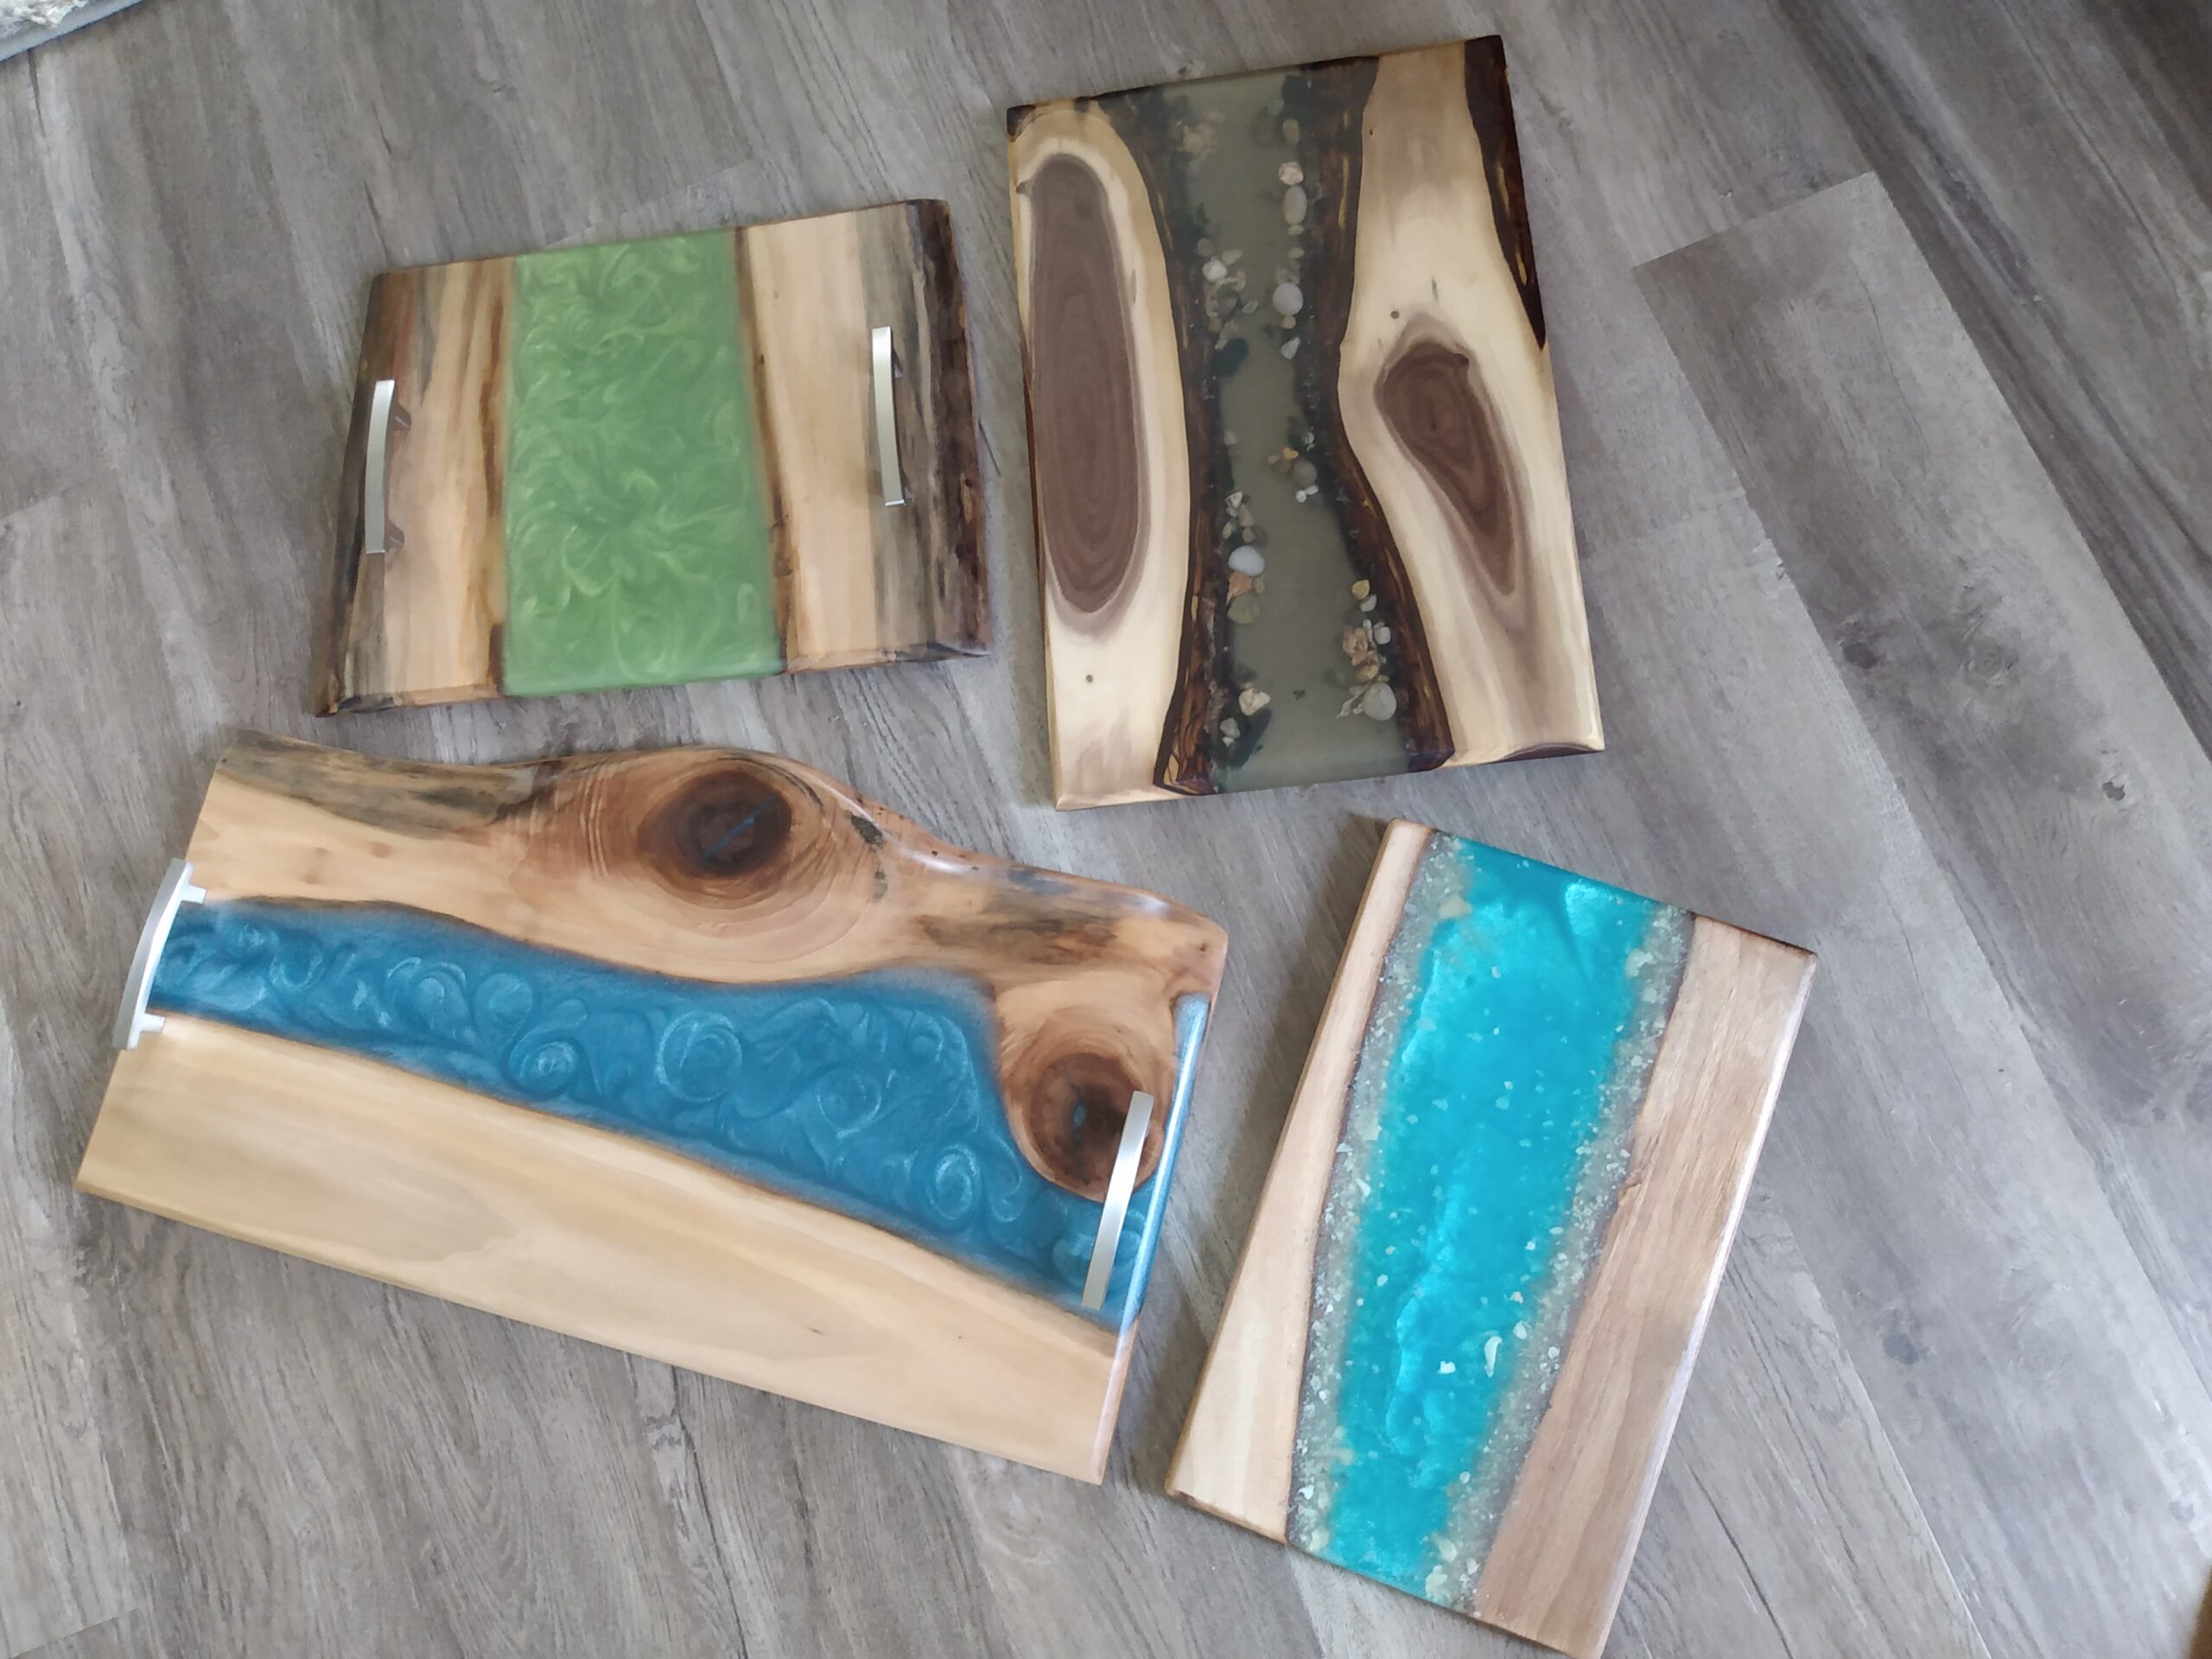 Four wooden cutting boards with epoxy poured in the center.